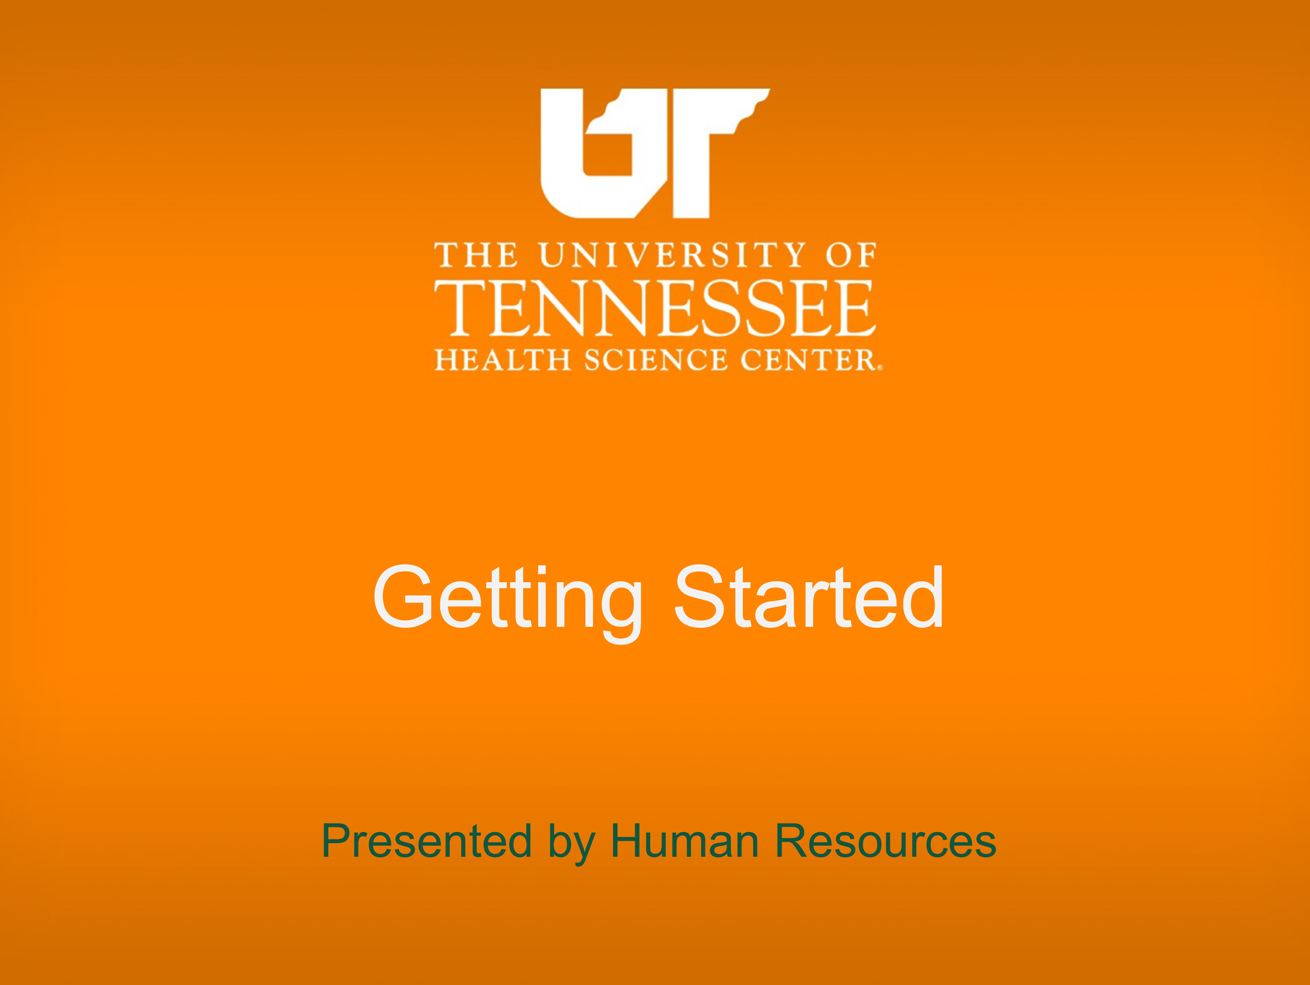 UTHSC Human Resources presents "Getting Started" for New Hires.